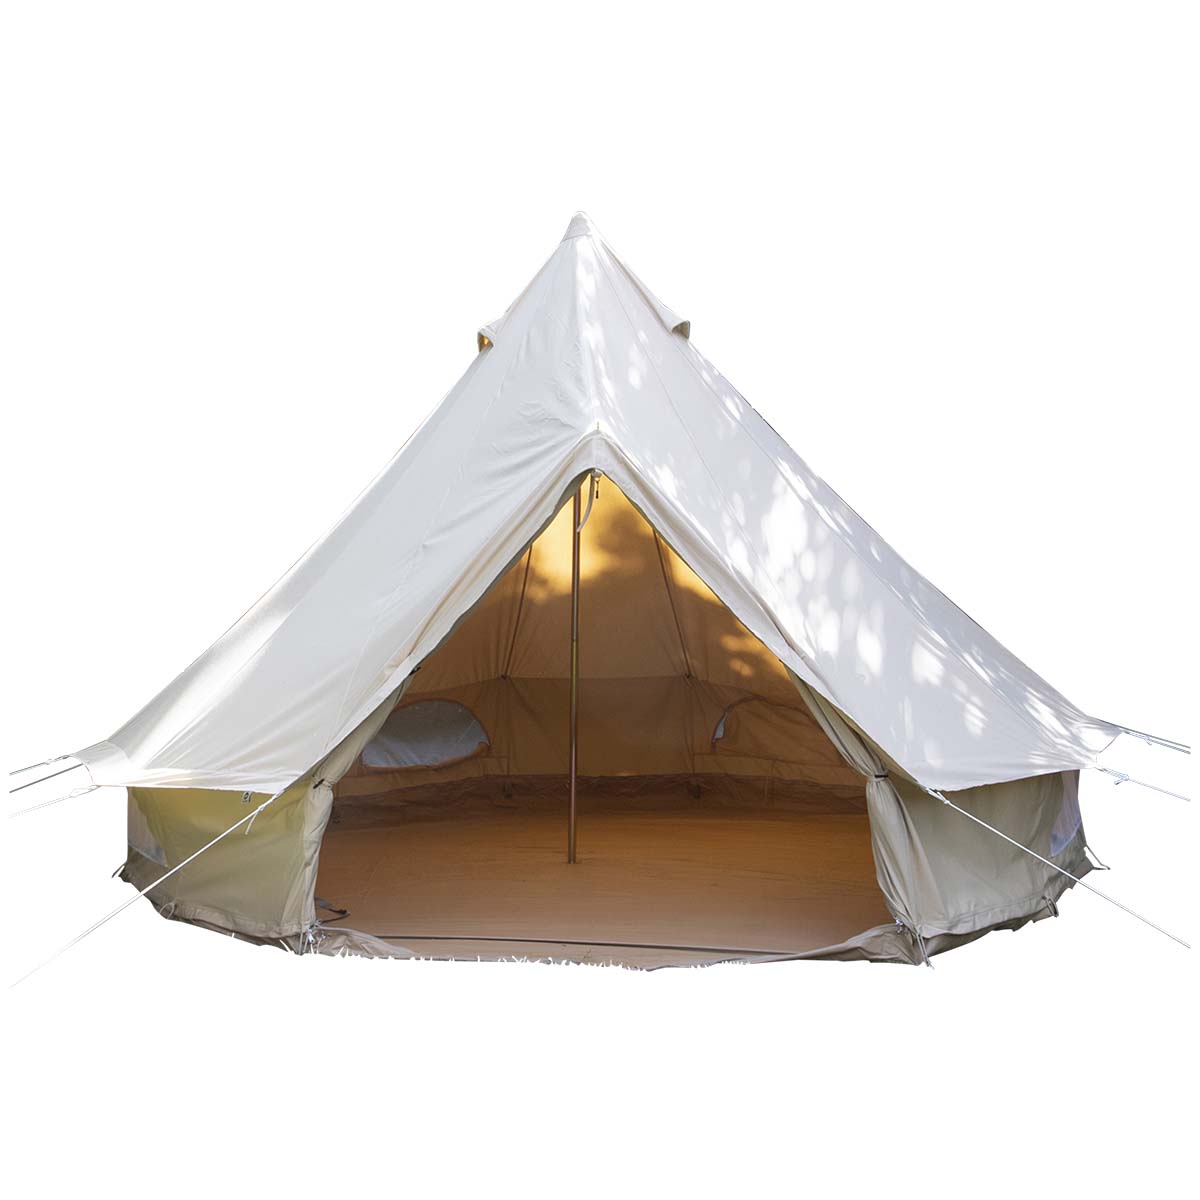 4472500 A classic Bell tent. An extremely popular Sahara tent with a large floor area and high ease of use. The diameter of this tent is 4 meters and the ridge height is 2.5 meters. This makes the tent suitable for up to 6 people. Made from high quality canvas, 100% cotton (285g/m²), and a 540 gram PVC groundsheet. Both are water resistant, rot and mold resistant. The groundsheet is fully removable by means of a zipper. In addition the sides can be rolled up completely to a height of 60 cm for extra ventilation. Moreover, there are several windows in the sides. The entrance has a double door, 1 cotton door and 1 cotton mesh door (against insects). Comes with strong pegs, guy ropes and a handy storage bag. In short, a decent and stylish tent for years of enjoyment!